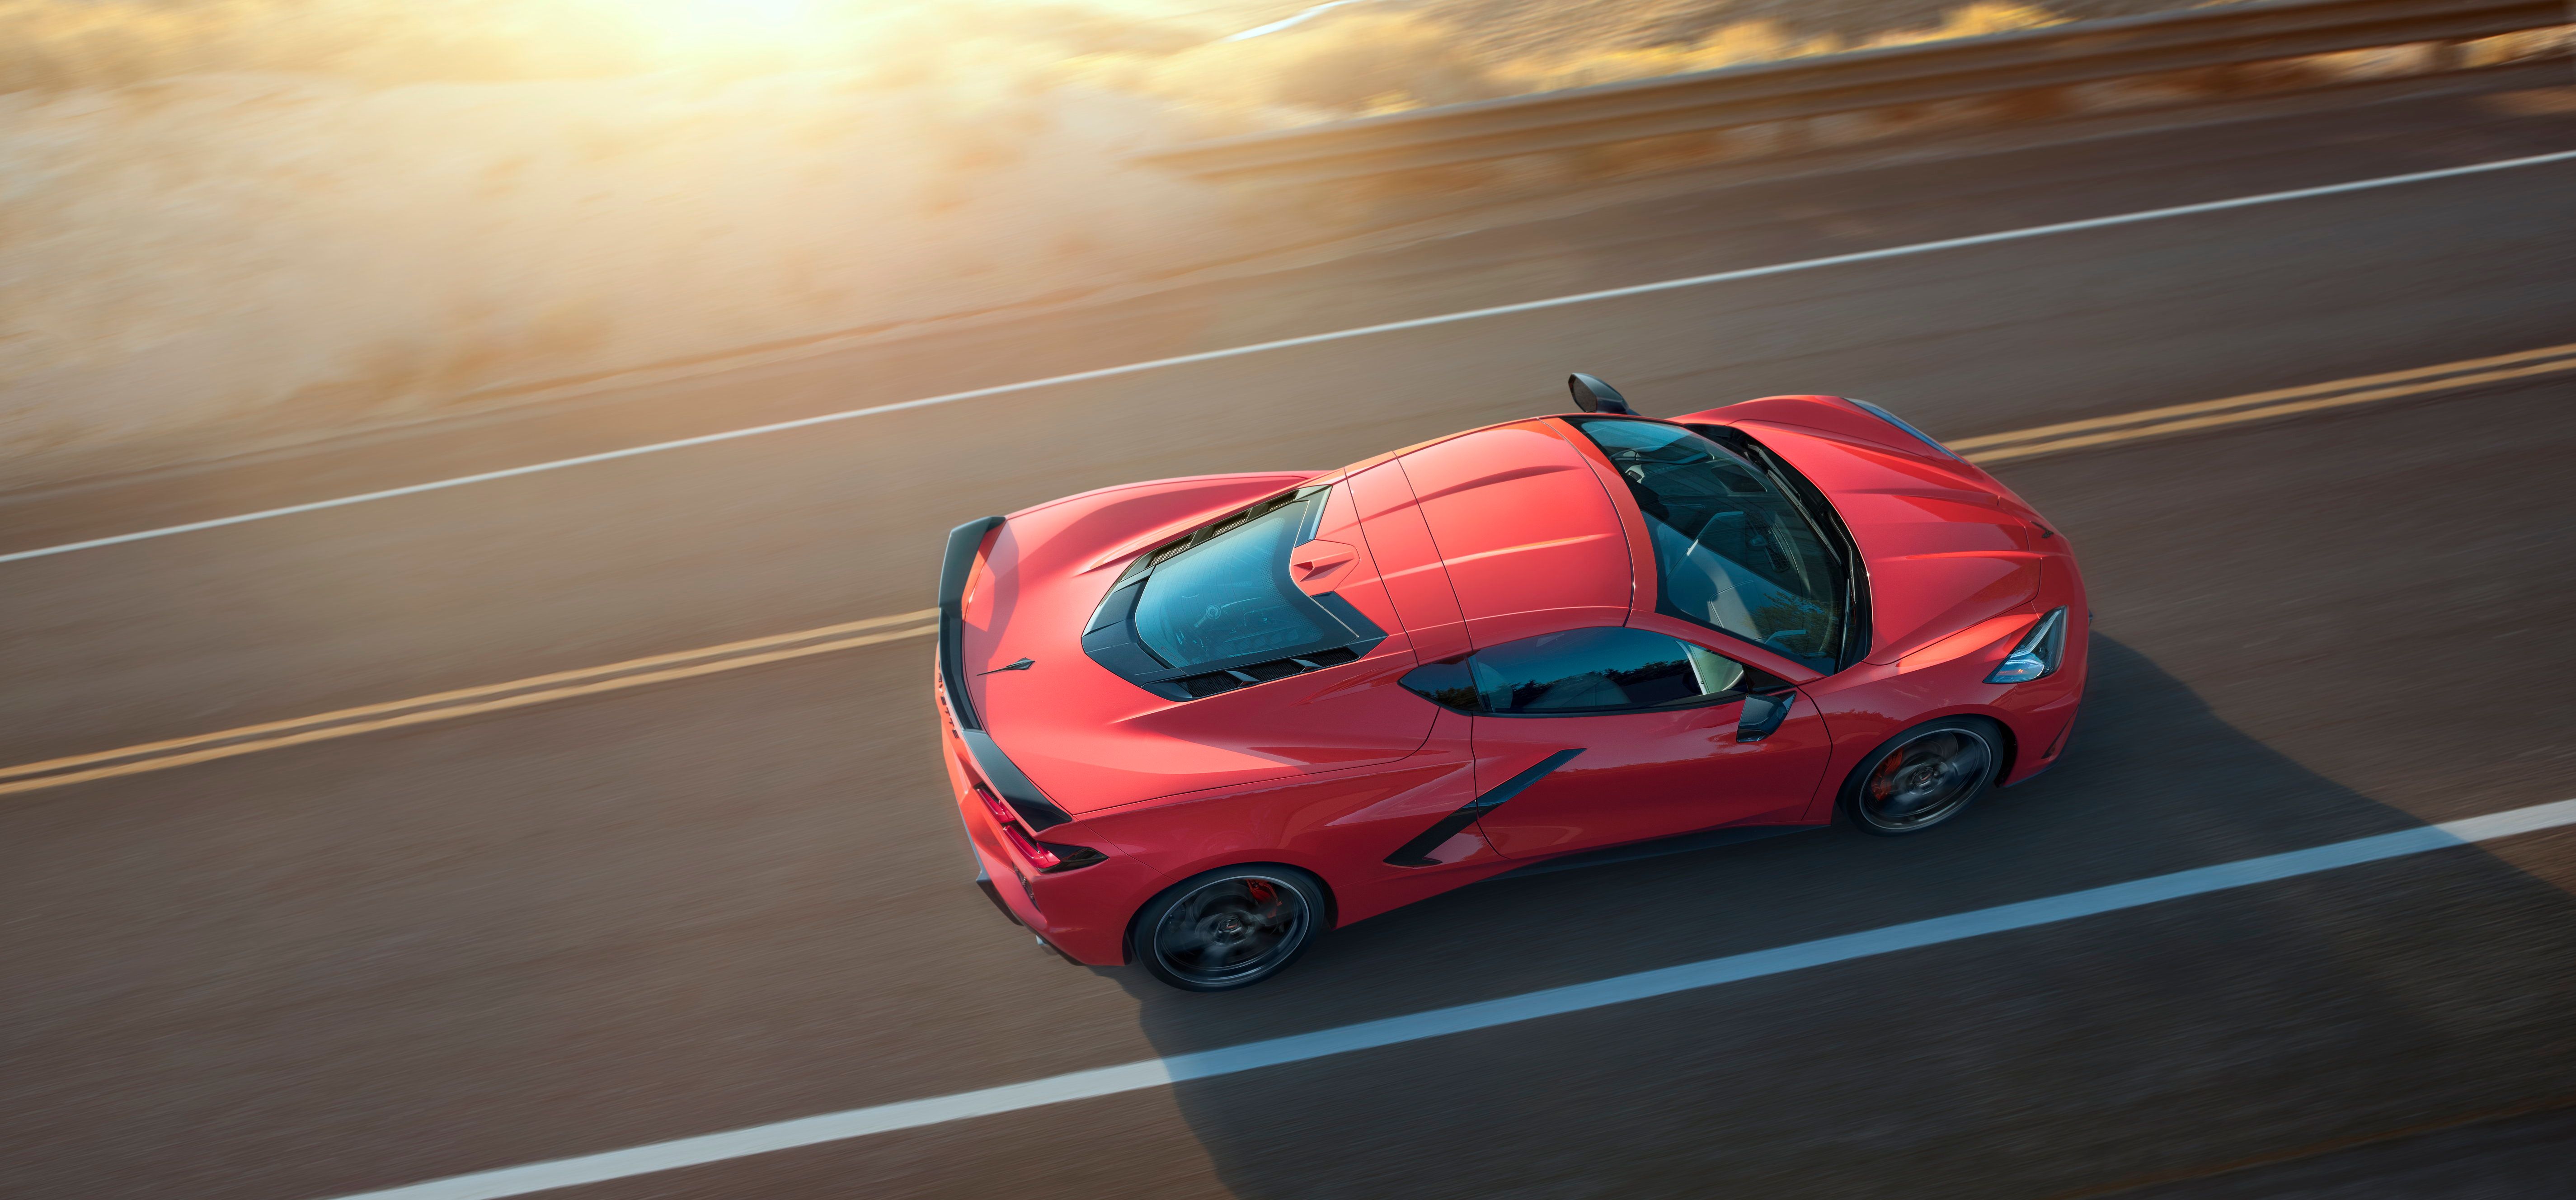 2019 The 2020 Chevy C8 Corvette is a New Life Line for the Chevy Camaro - Here Are 5 Reasons Why